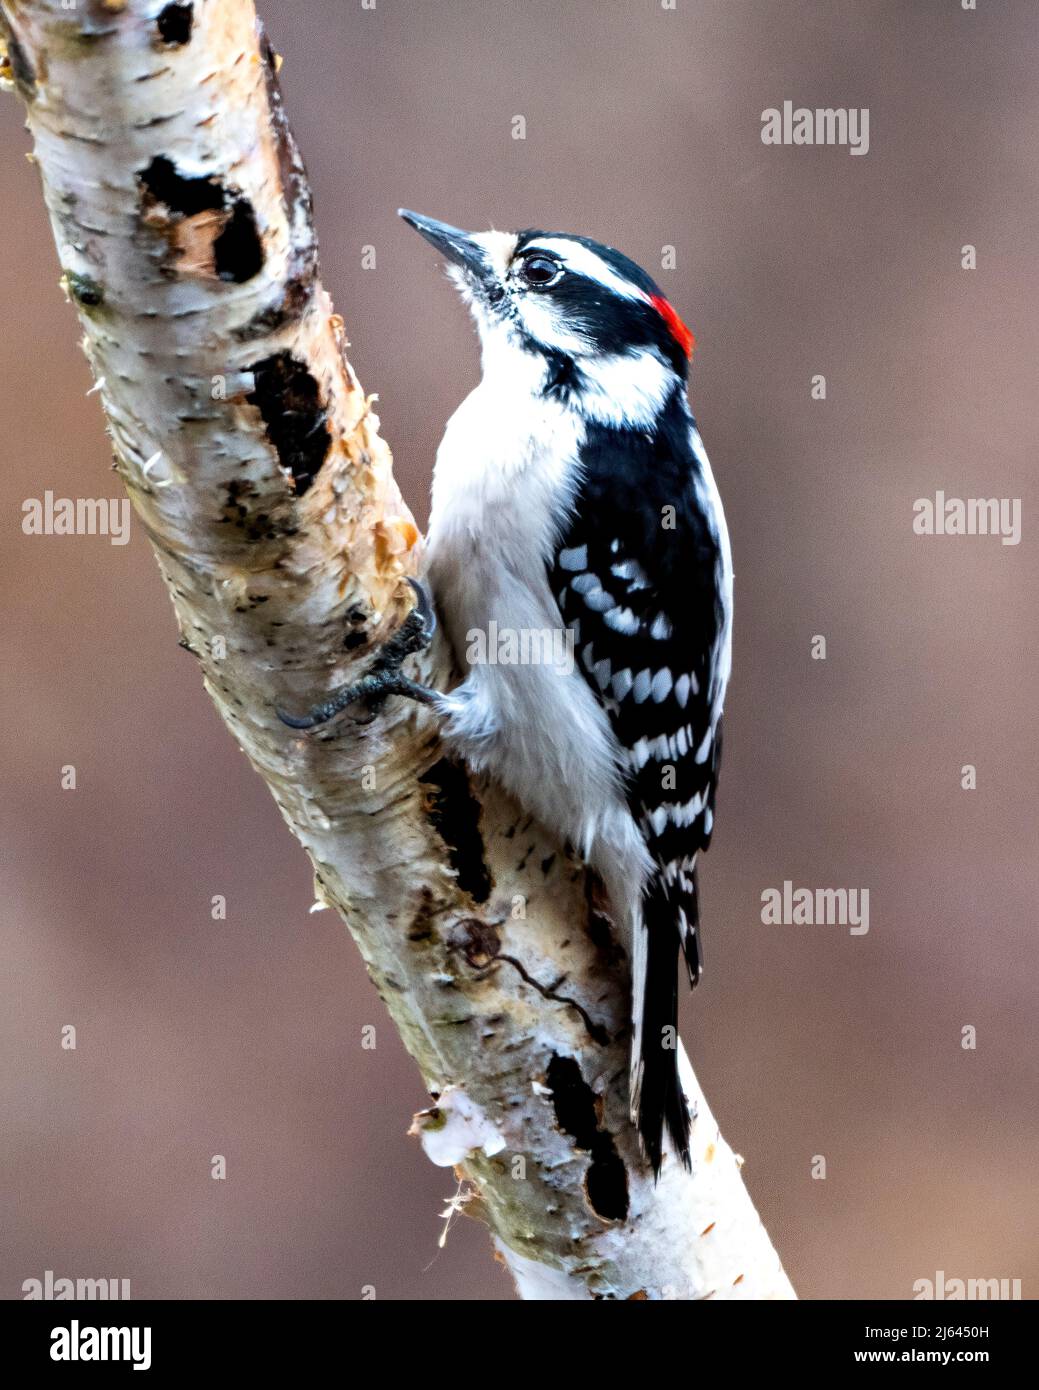 Woodpecker male close-up profile view perched on a tree branch with blur background in its environment and habitat. Image. Picture. Portrait. Stock Photo